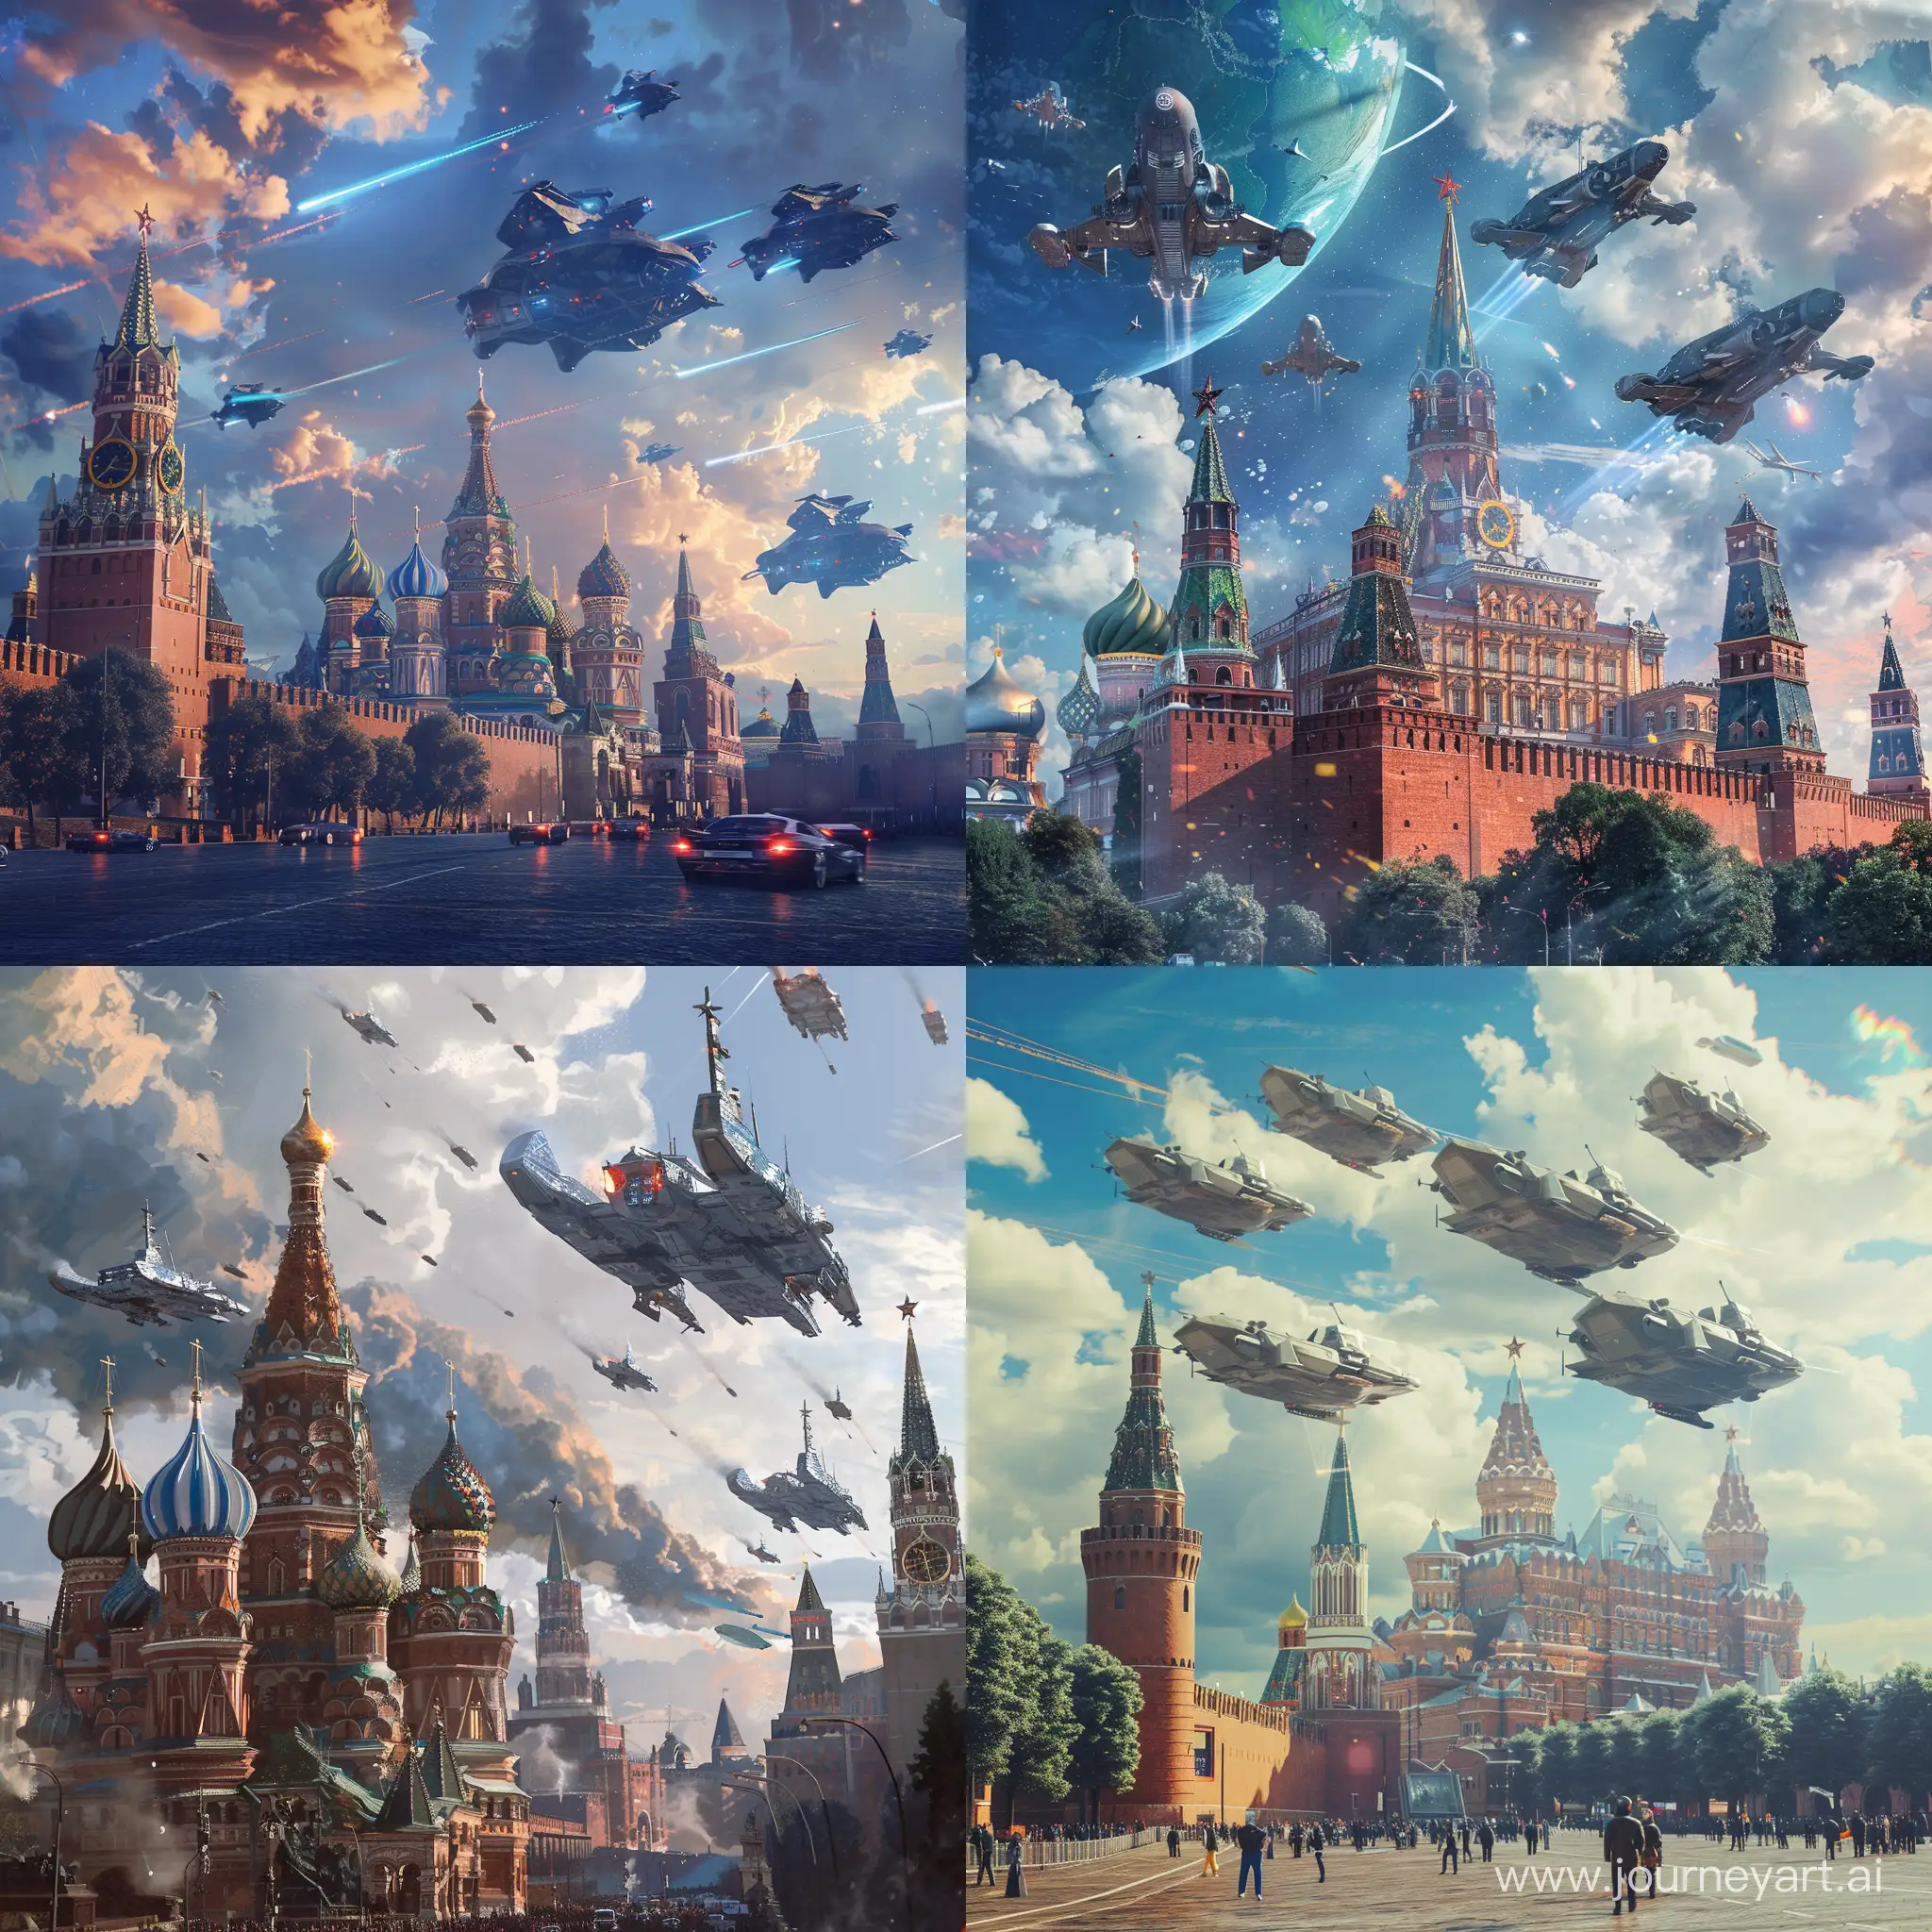 Moscow Red Square future time. Spaceships are flying,